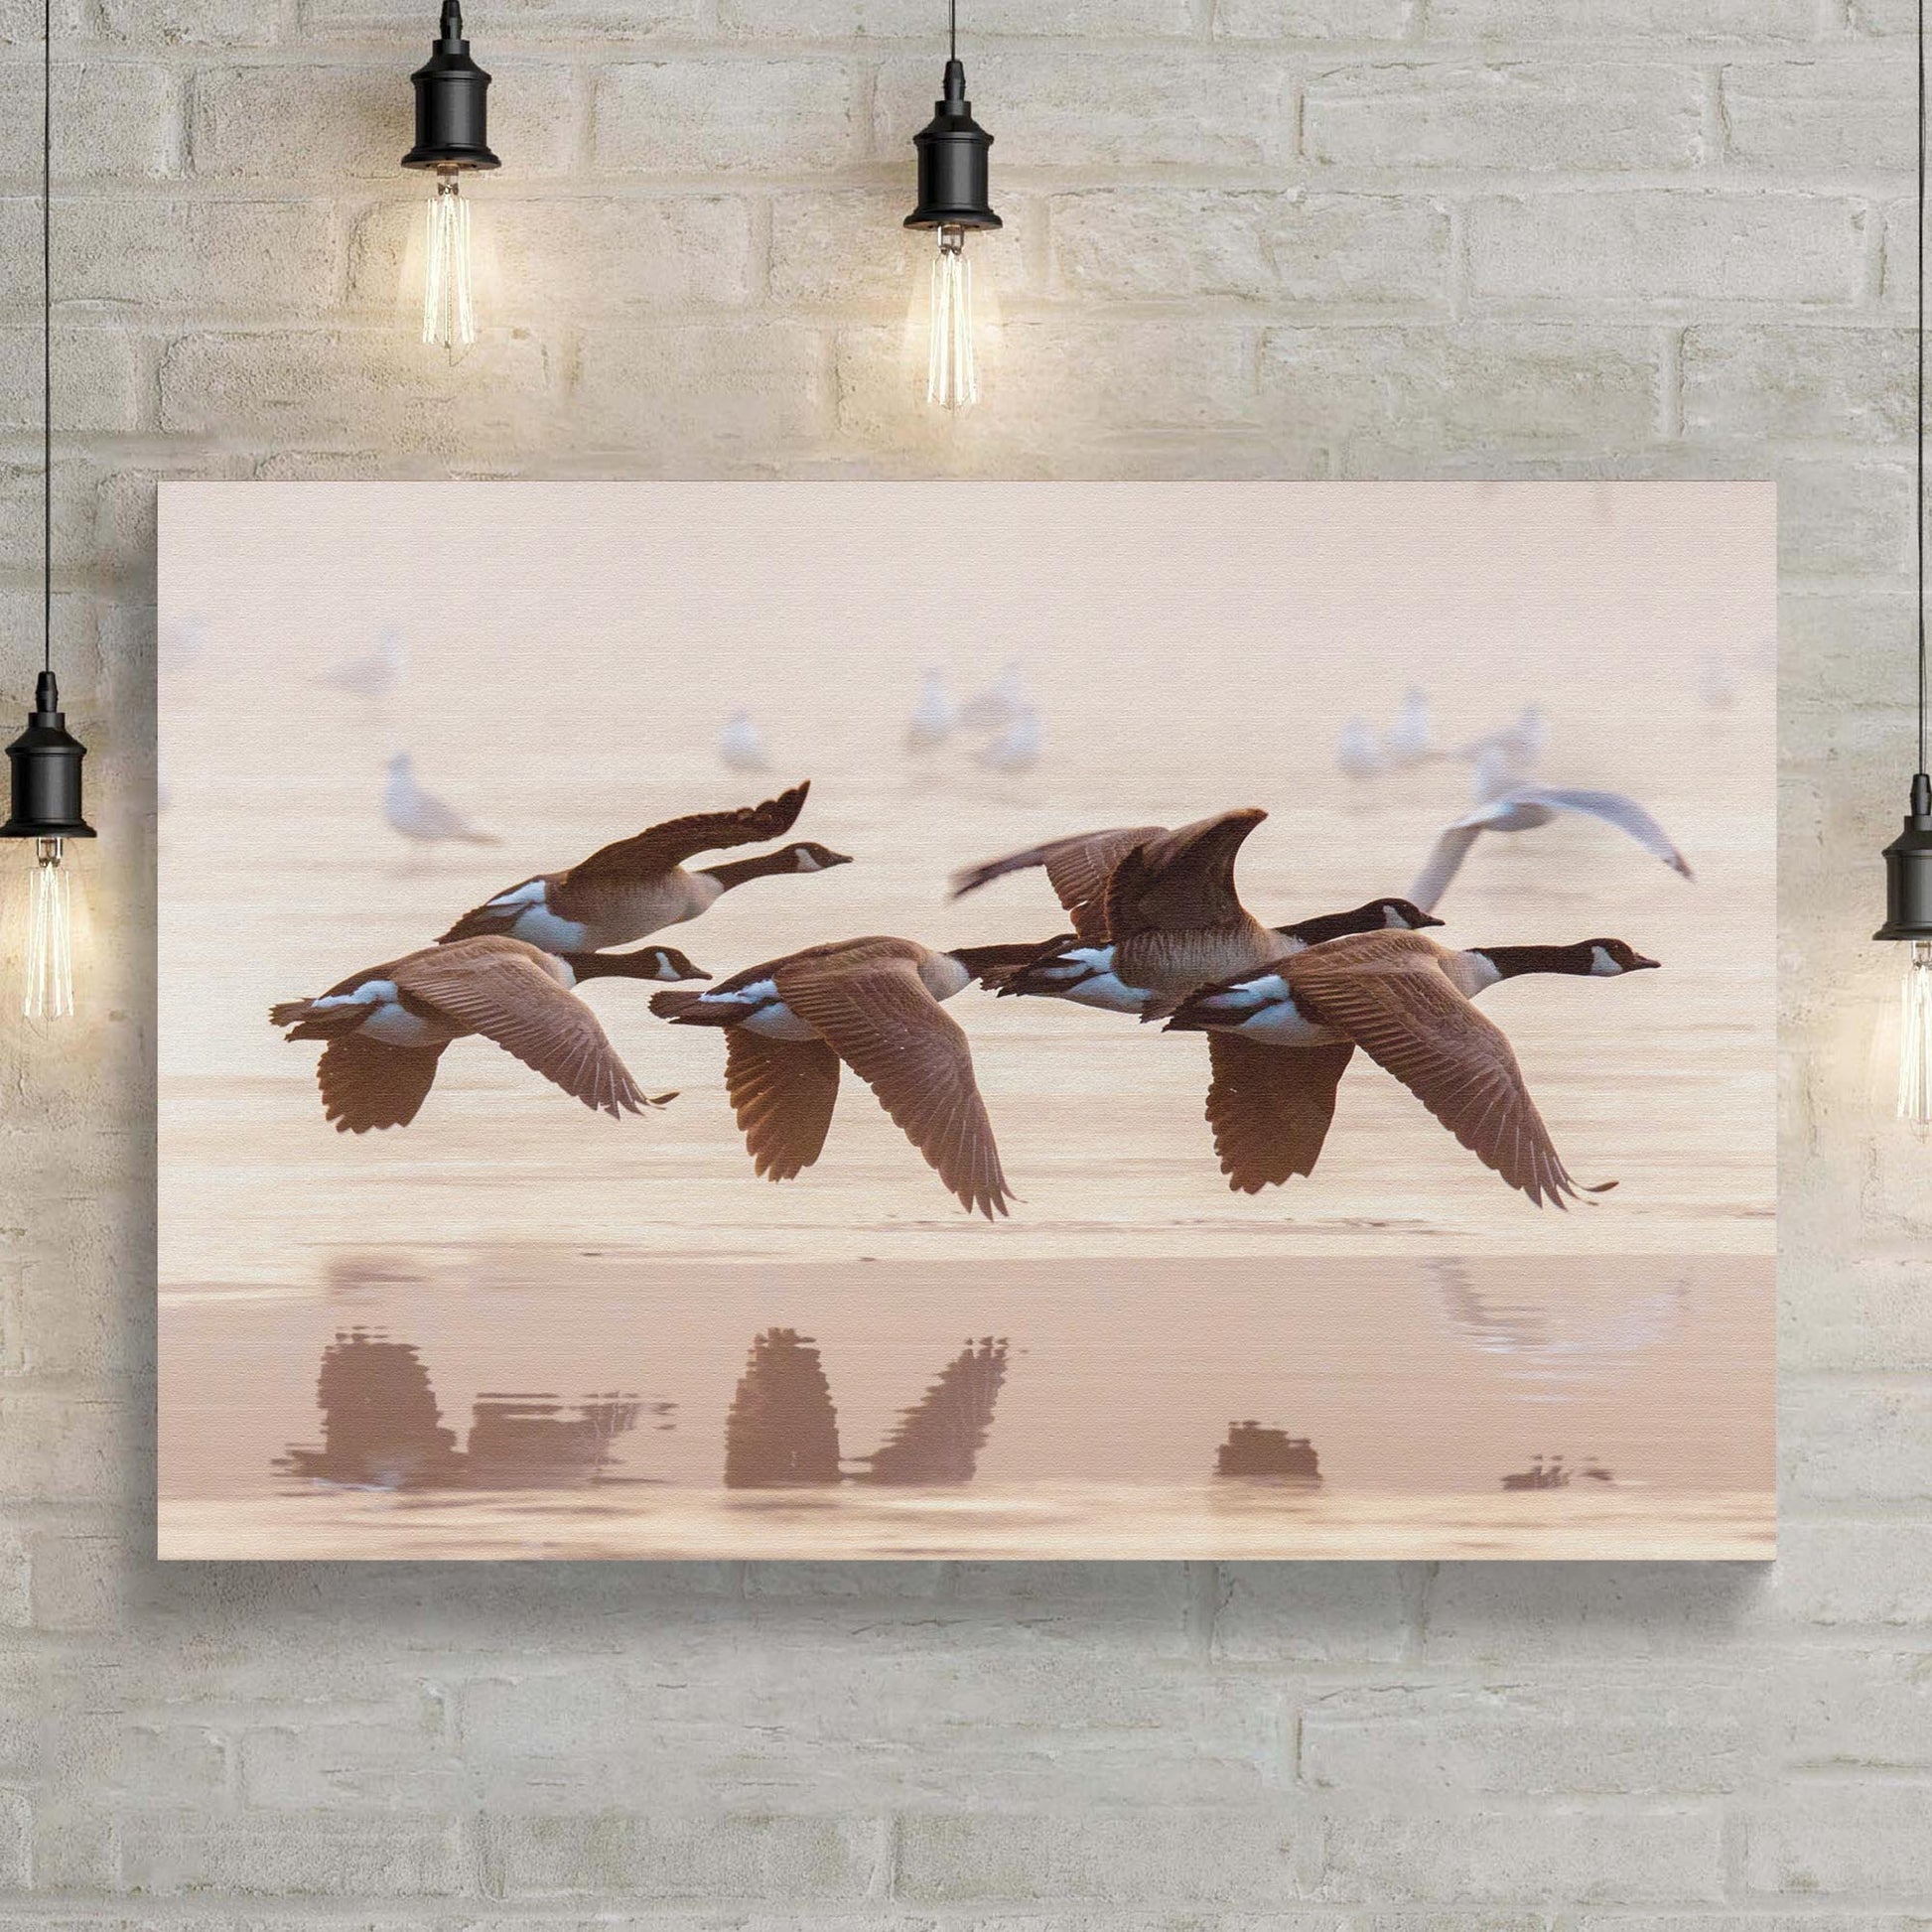 Low Flying Cheese Canvas Wall Art - Image by Tailored Canvases